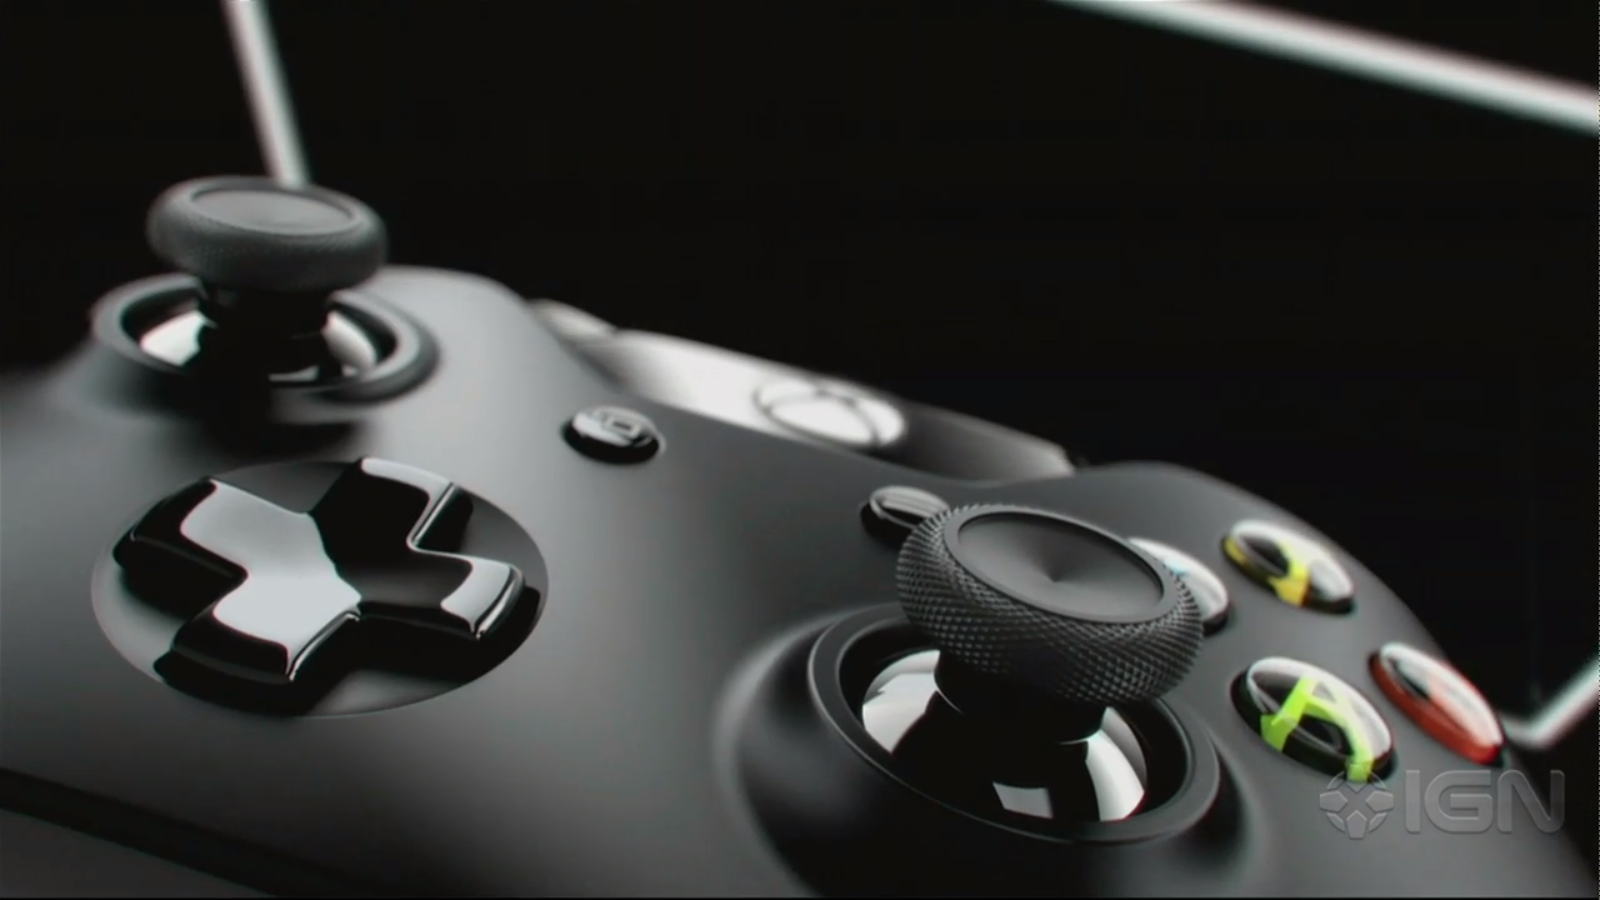 xbox one wallpaper hd,game controller,joystick,gadget,electronic device,playstation accessory